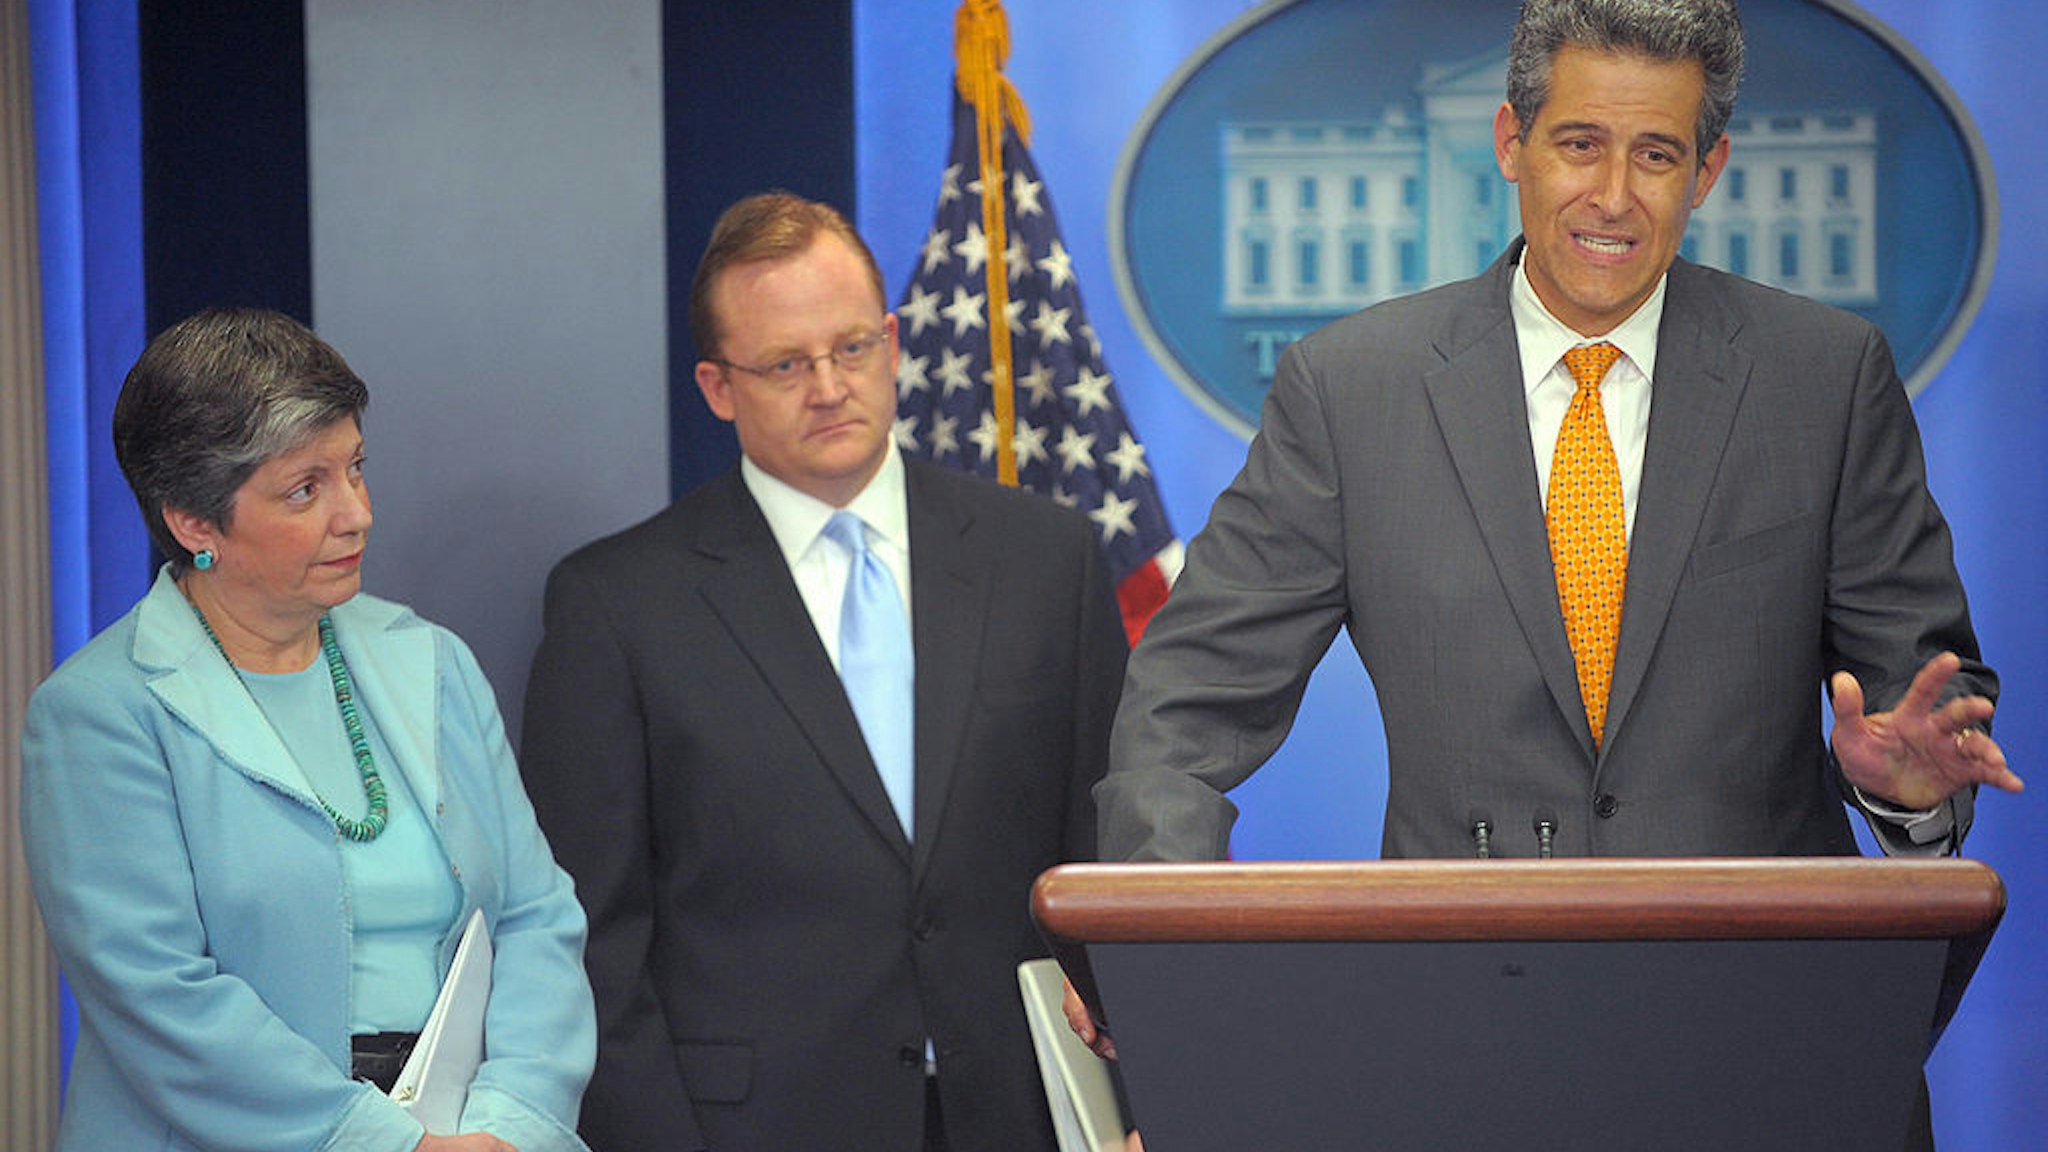 Homeland Security Secretary Janet Napolitano(L) and Robert Gibbs, White House Press Secretary look on as acting director of the Centers for Disease Control and Prevention, Dr. Richard Besser speaks during a press briefing on the swine flu outbreak April 26, 2009 in the Brady Press Briefing Room of the White House in Washington, DC